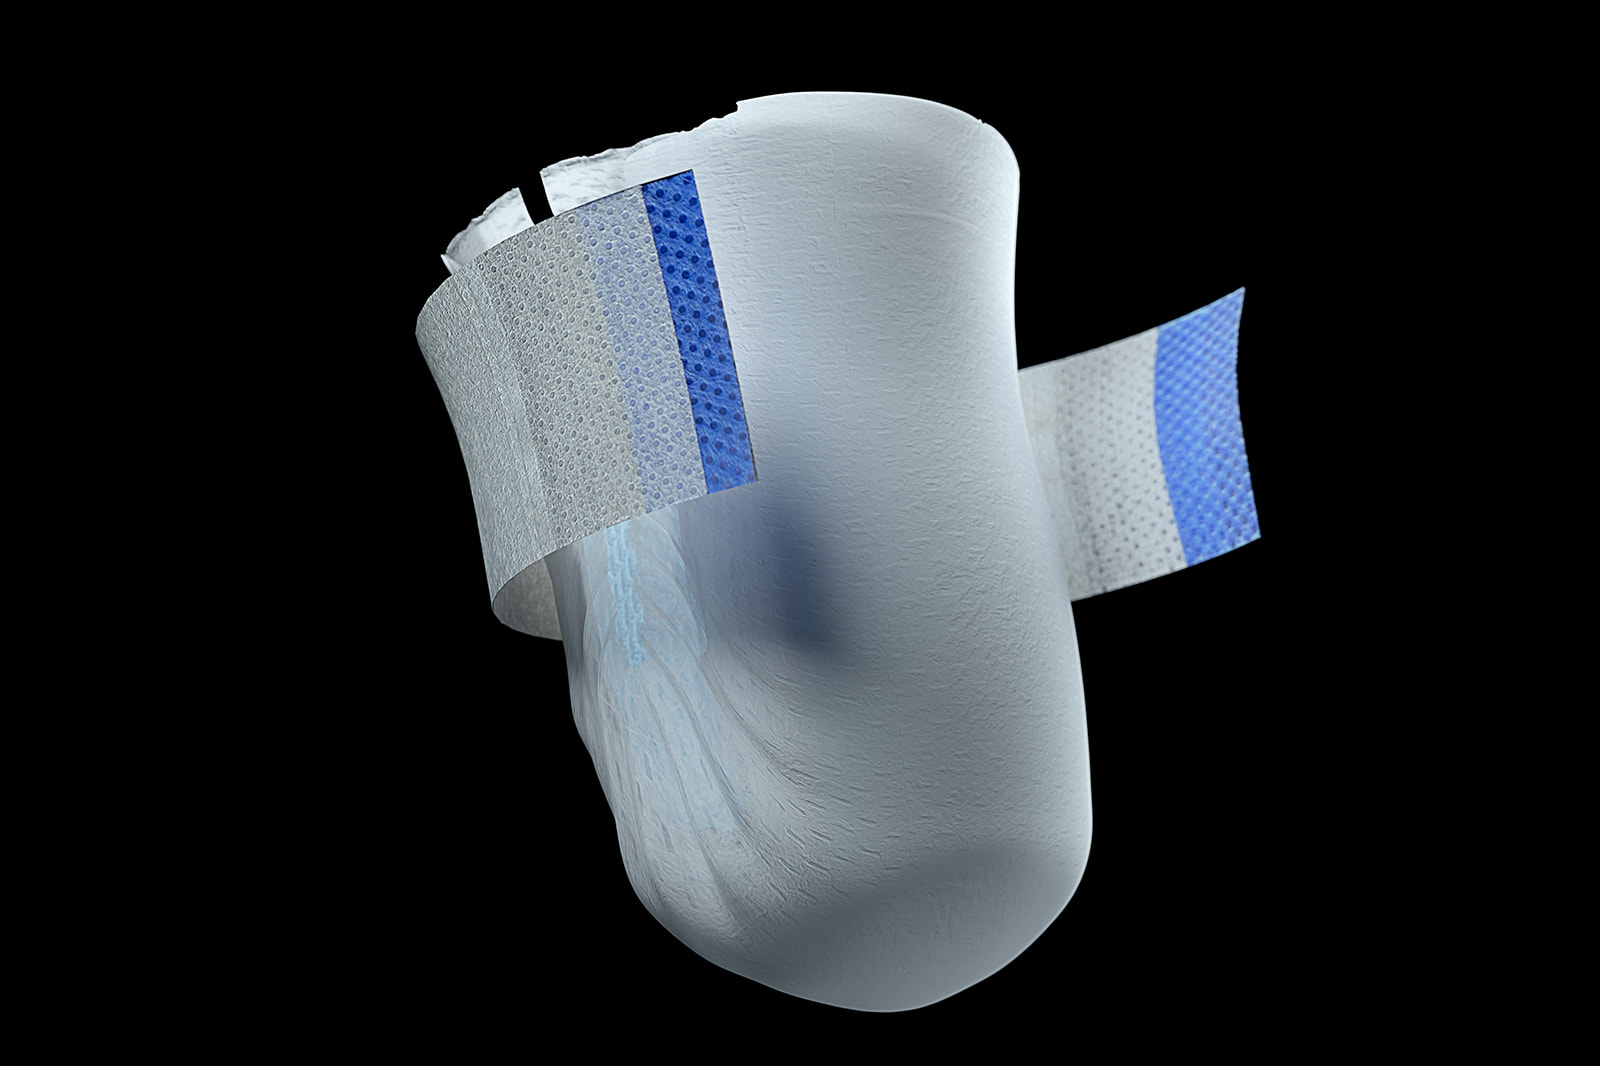 Male Drip Protection develops ‘game-changing’ male incontinence sleeve 